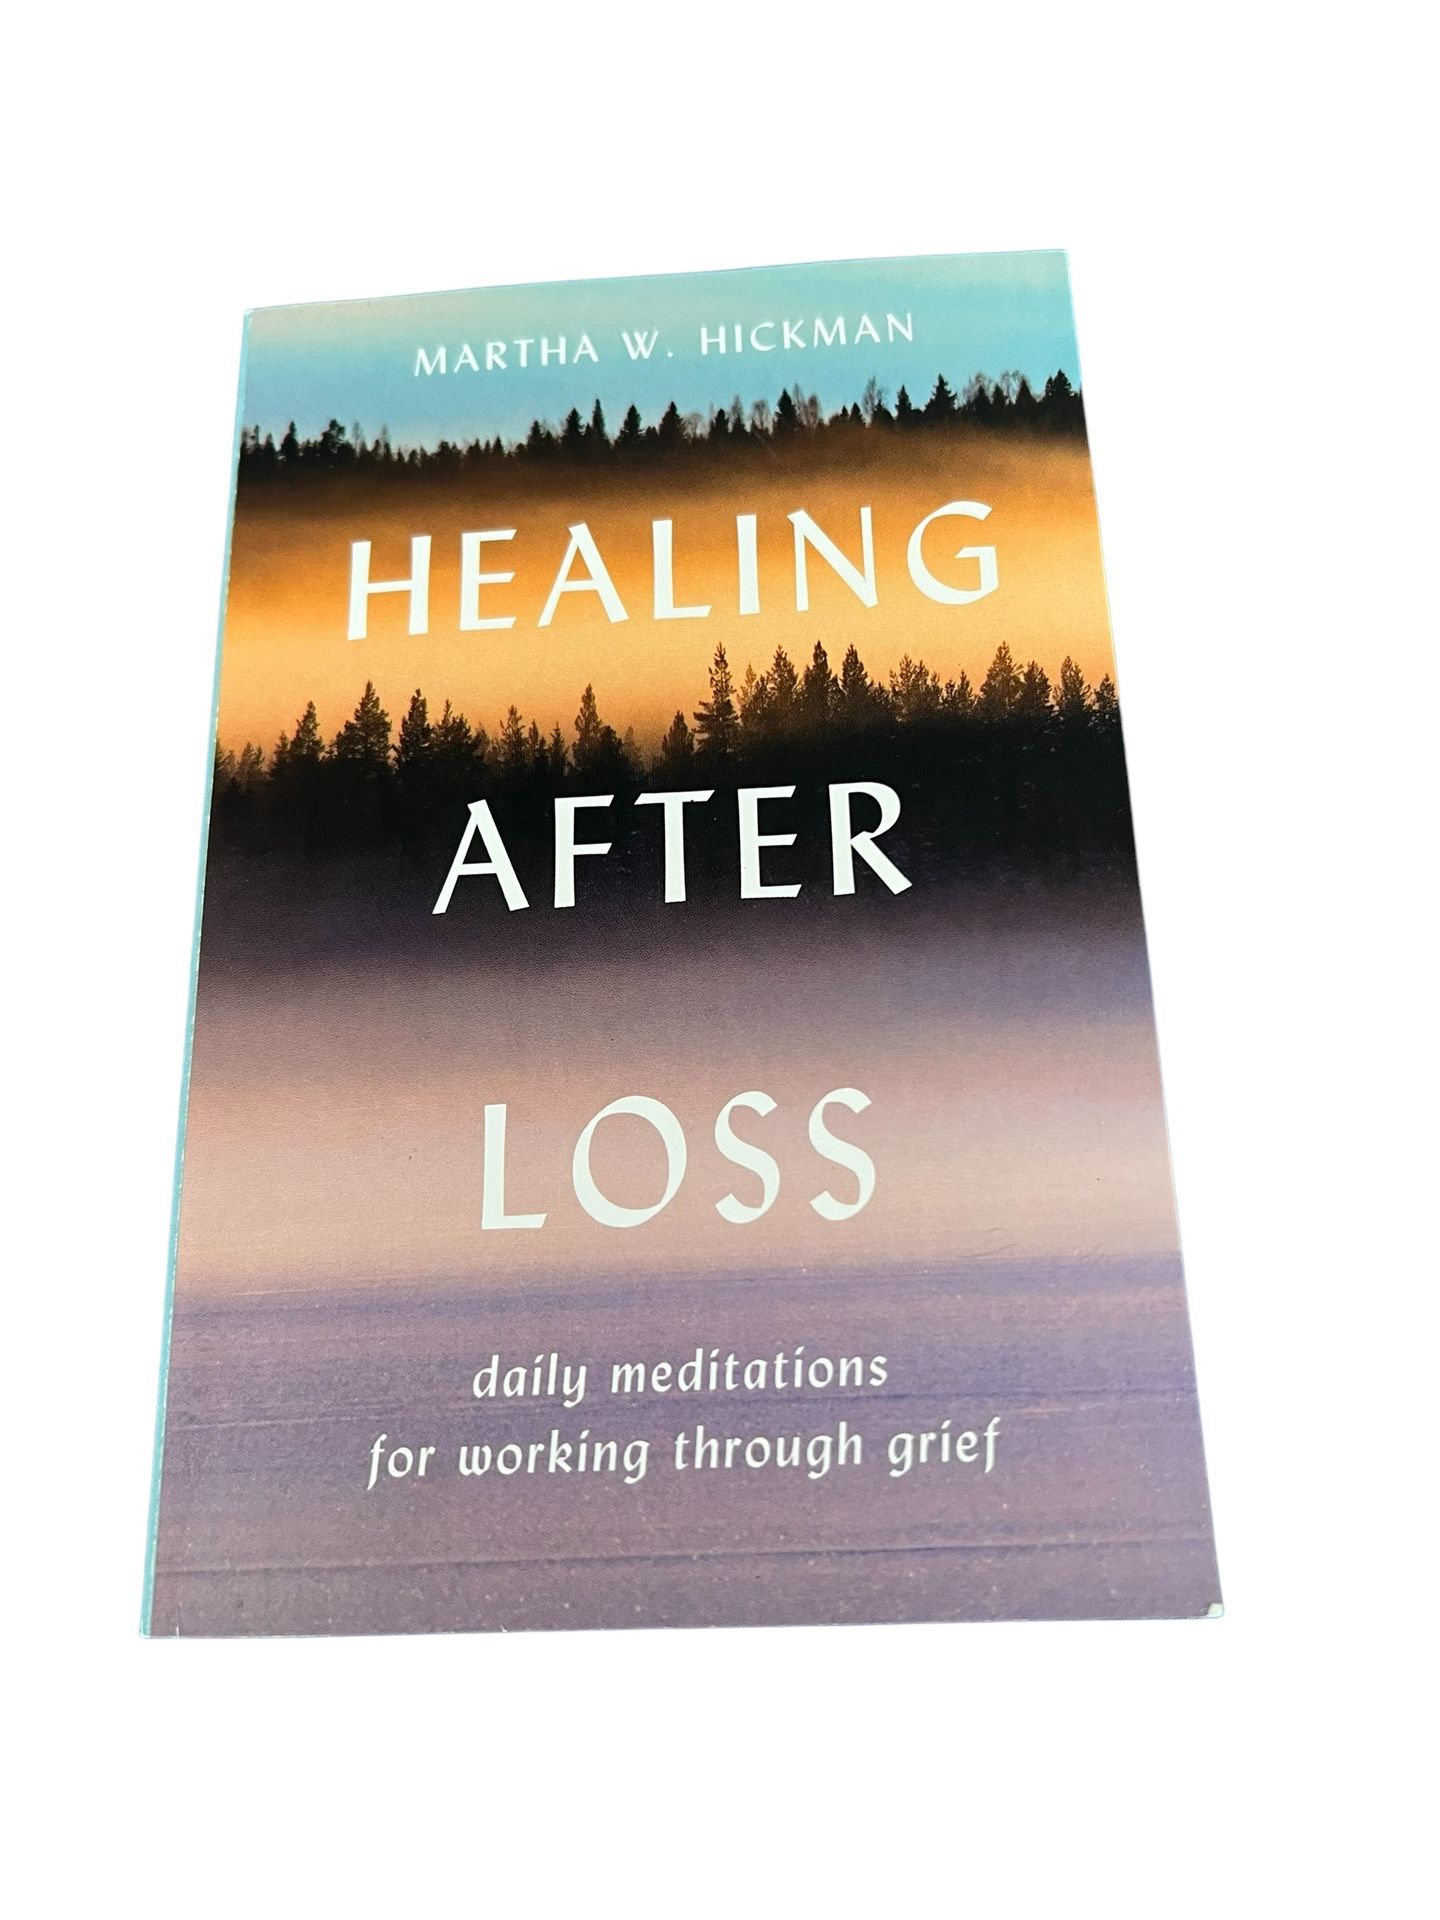 This book titled "Healing after Loss: Daily Meditations for Working Through Grief" by Martha W. Hickman is a great addition to your library. The book,